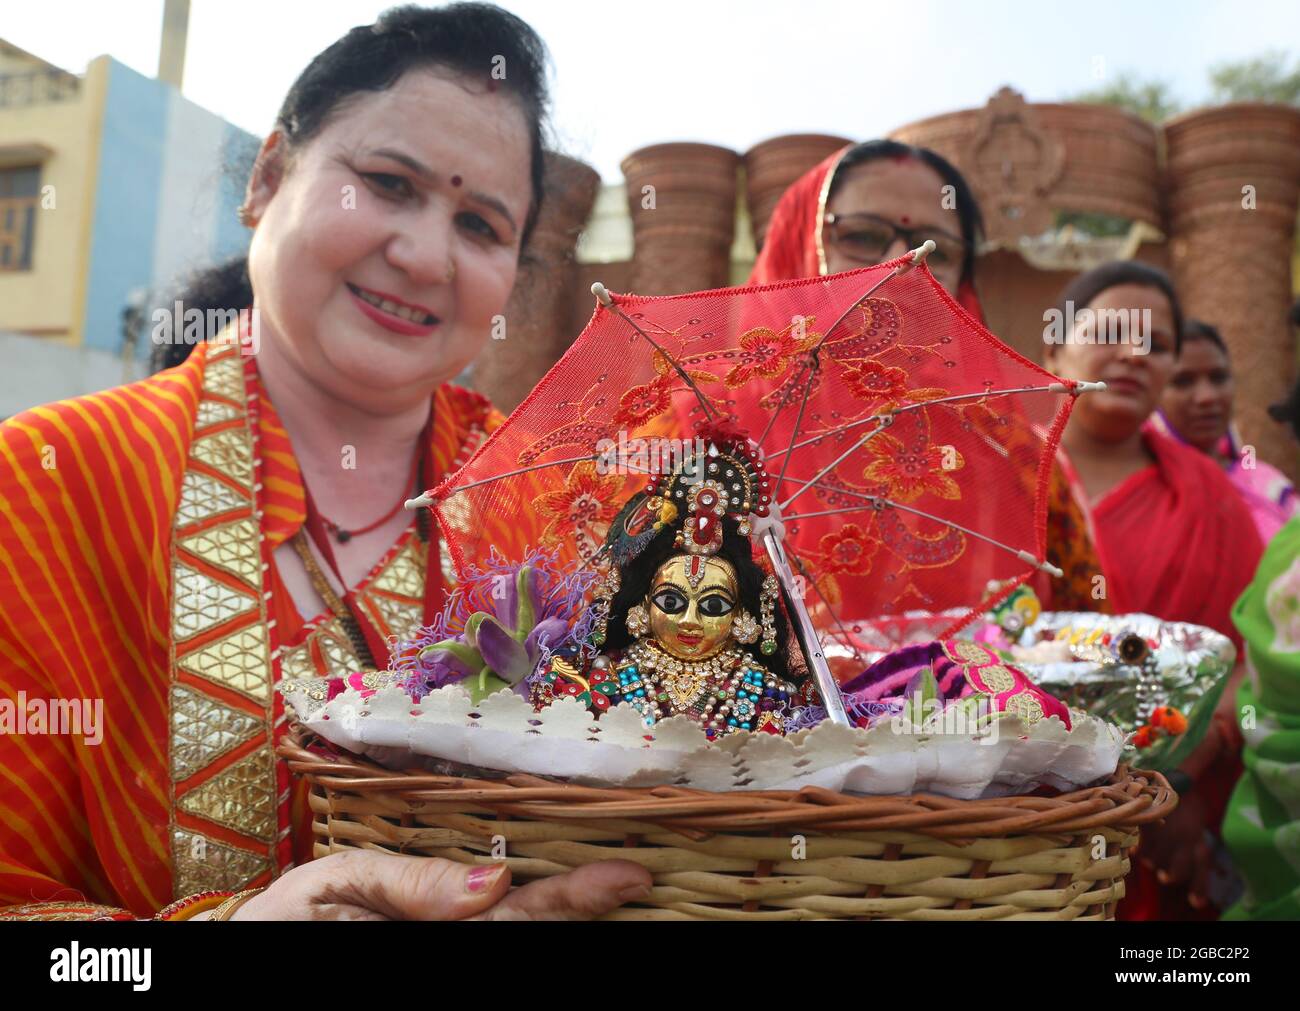 Beawar, Rajasthan, India, August 2, 2021: Hindu woman with the idol of Laddu Gopal (Lord Krishna), pose for a picture as she celebrate the holy month of Sawan (Shravan) in Beawar. Photo: Sumit Saraswat Stock Photo